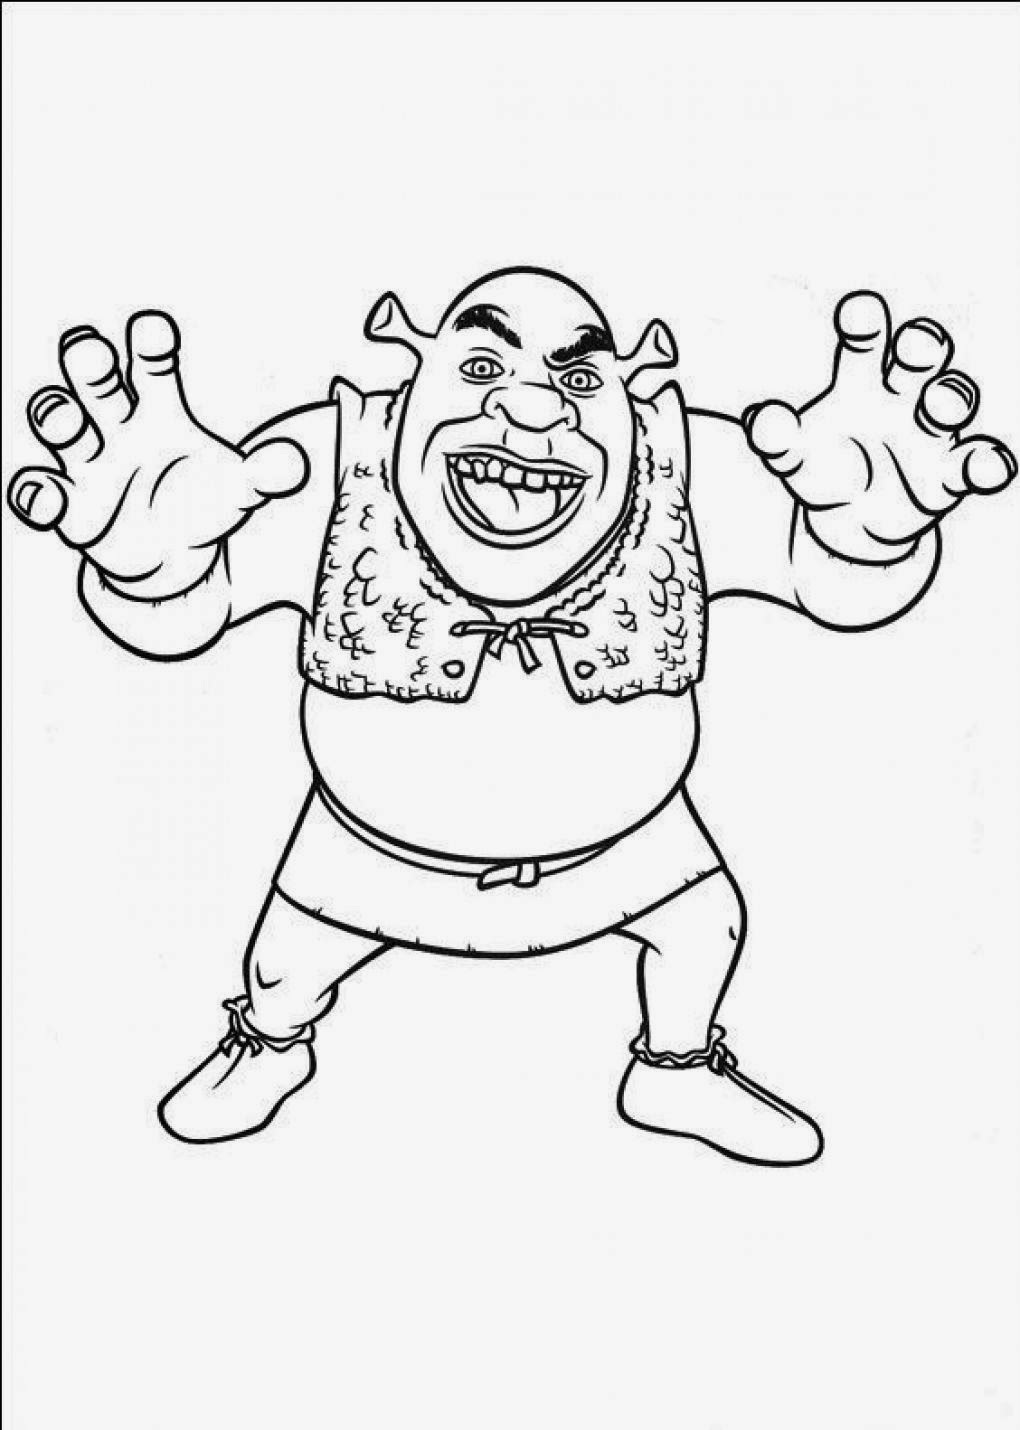 Cartoons Coloring Pages: Shrek Coloring Pages